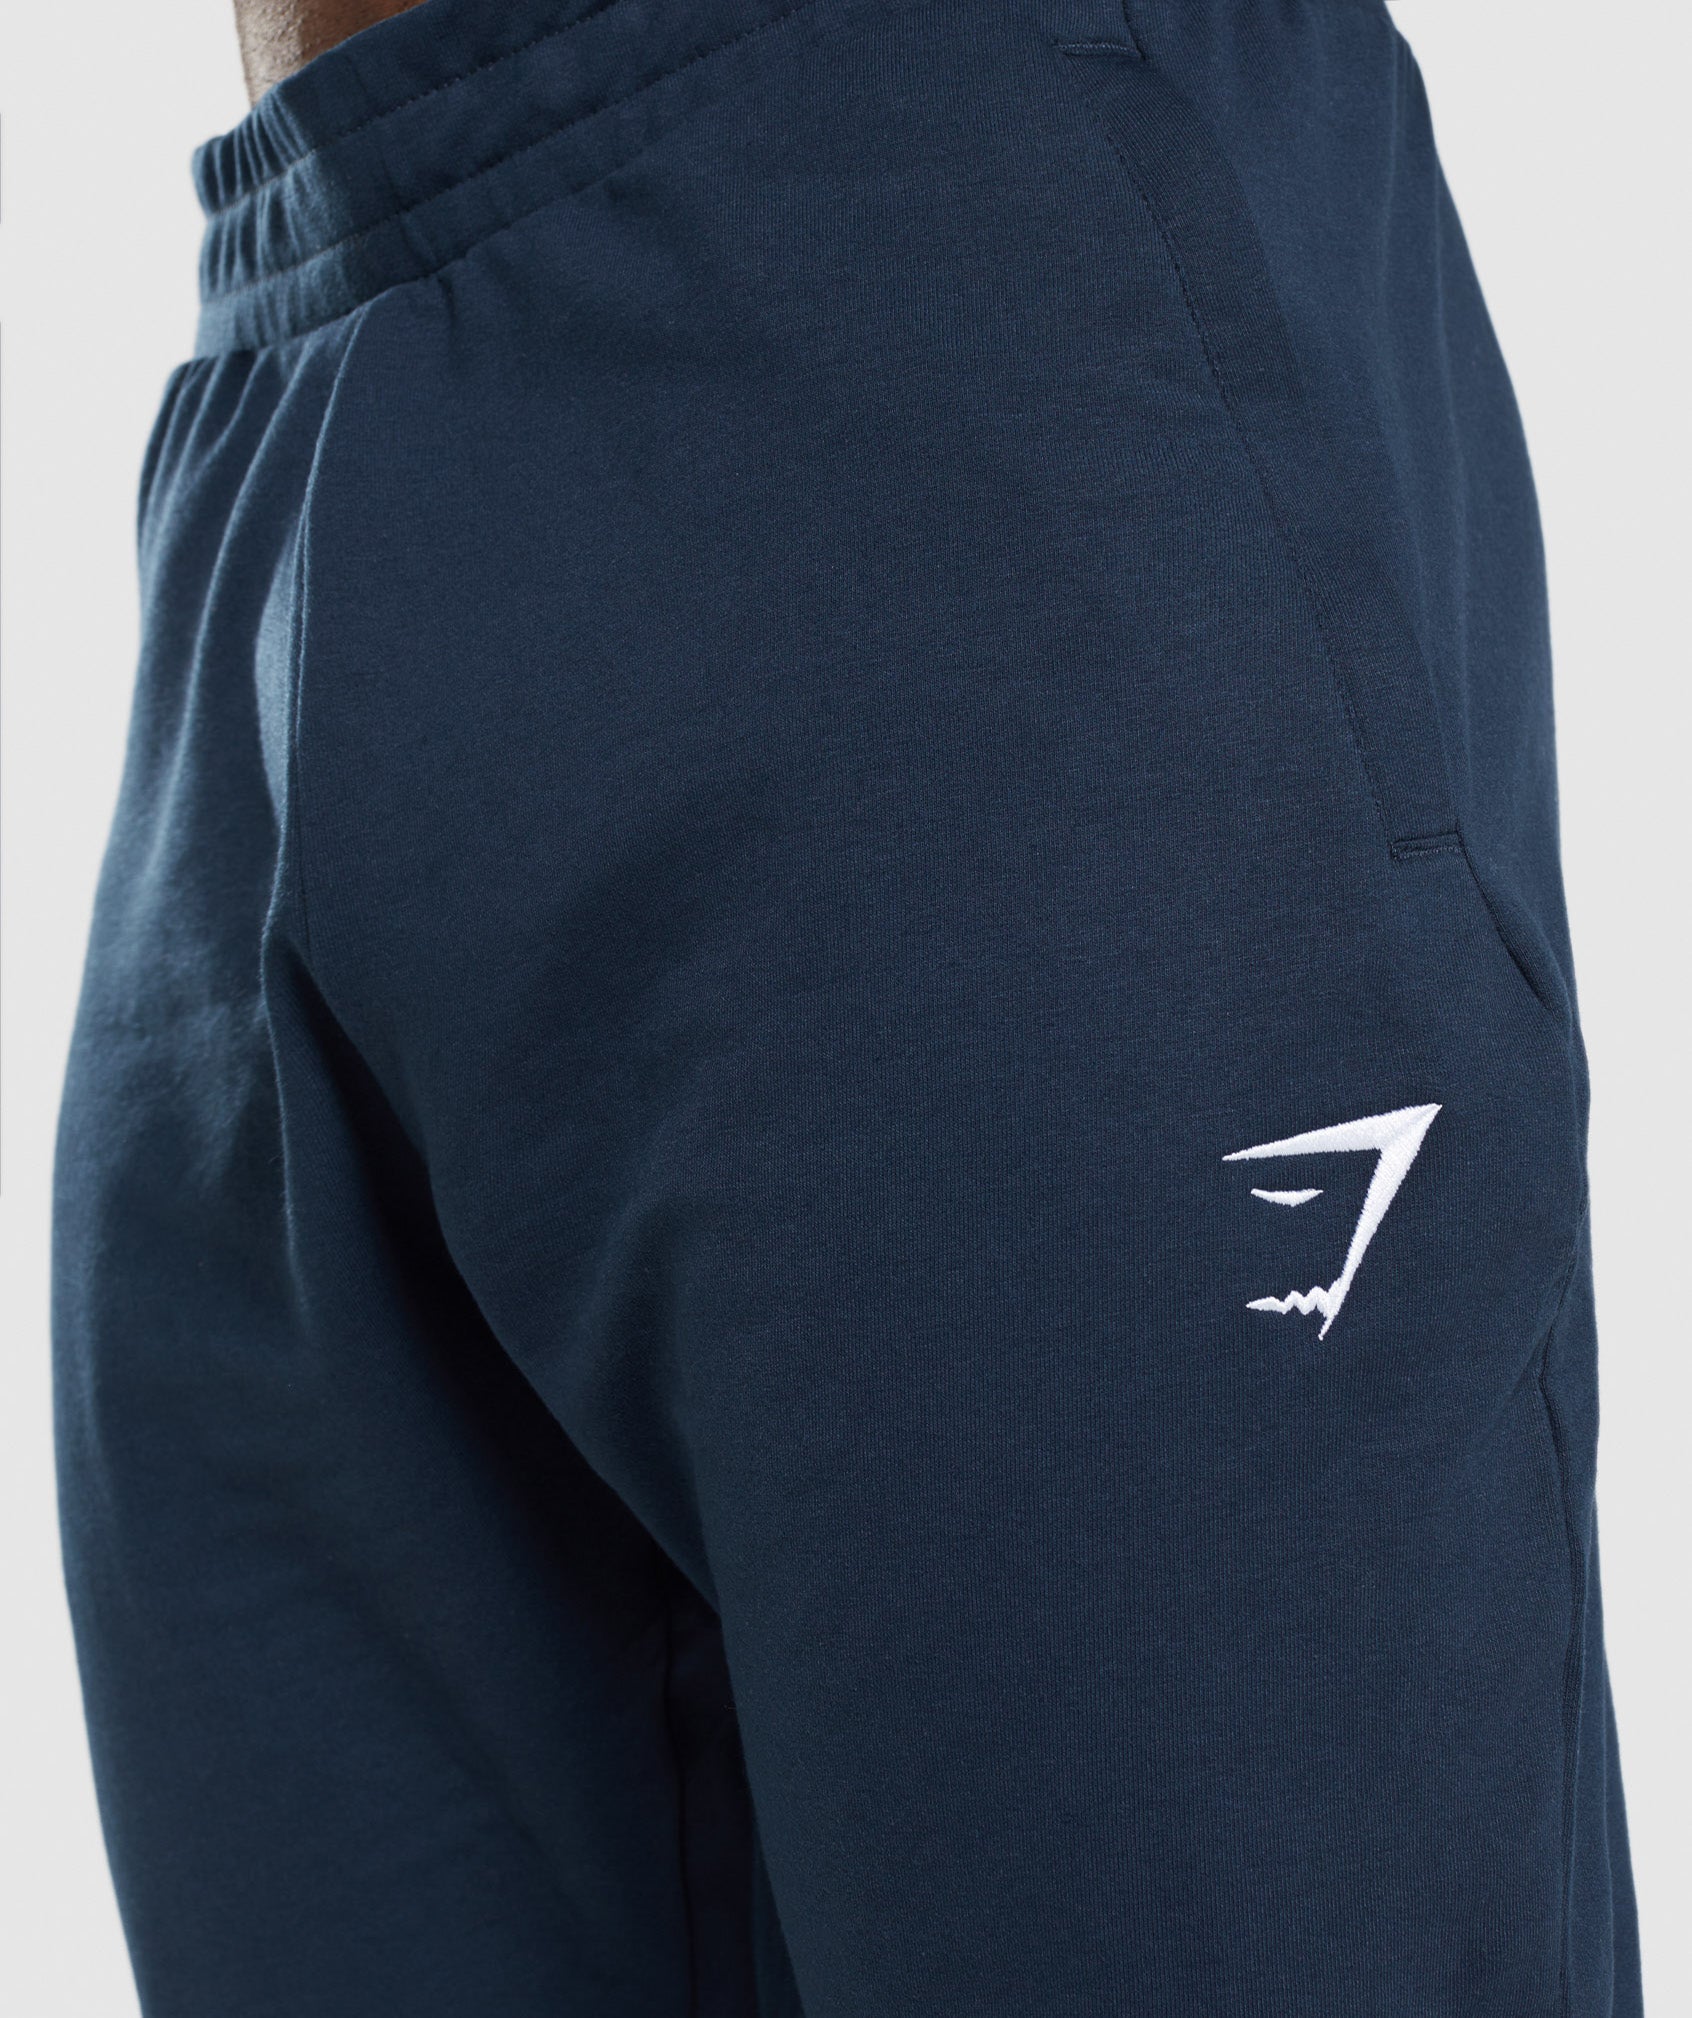 Critical Pant in Navy - view 5